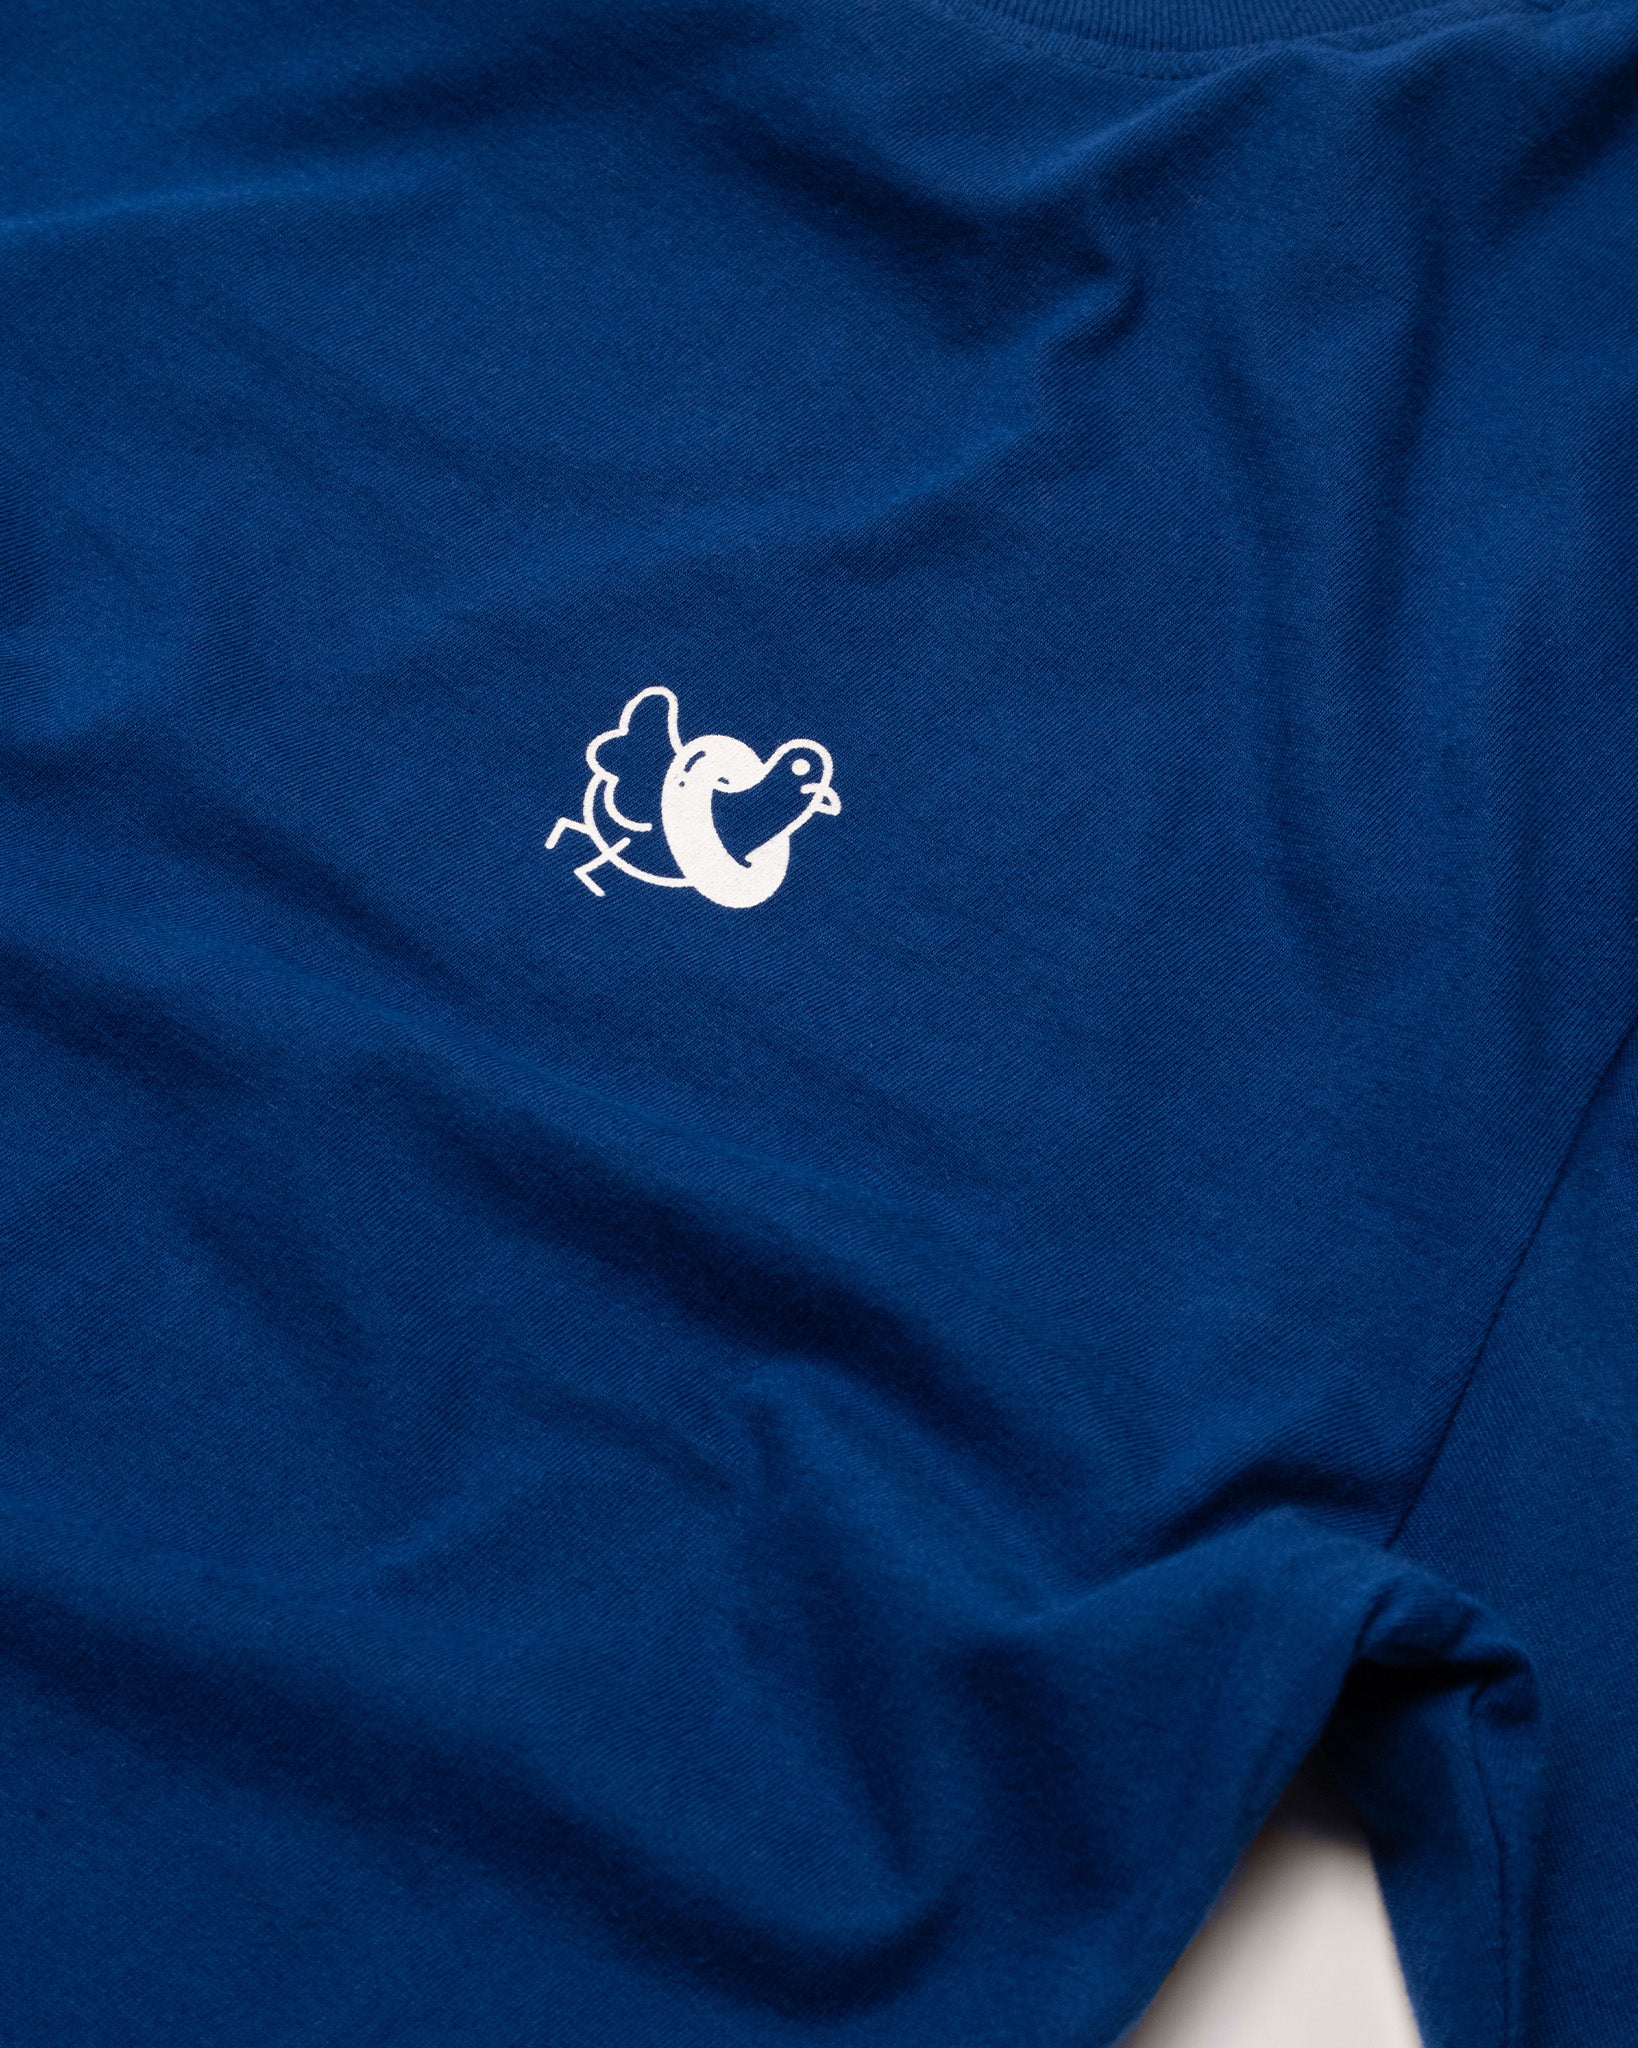 A closer image of the Public Pool icon on the front of a blue shirt. 